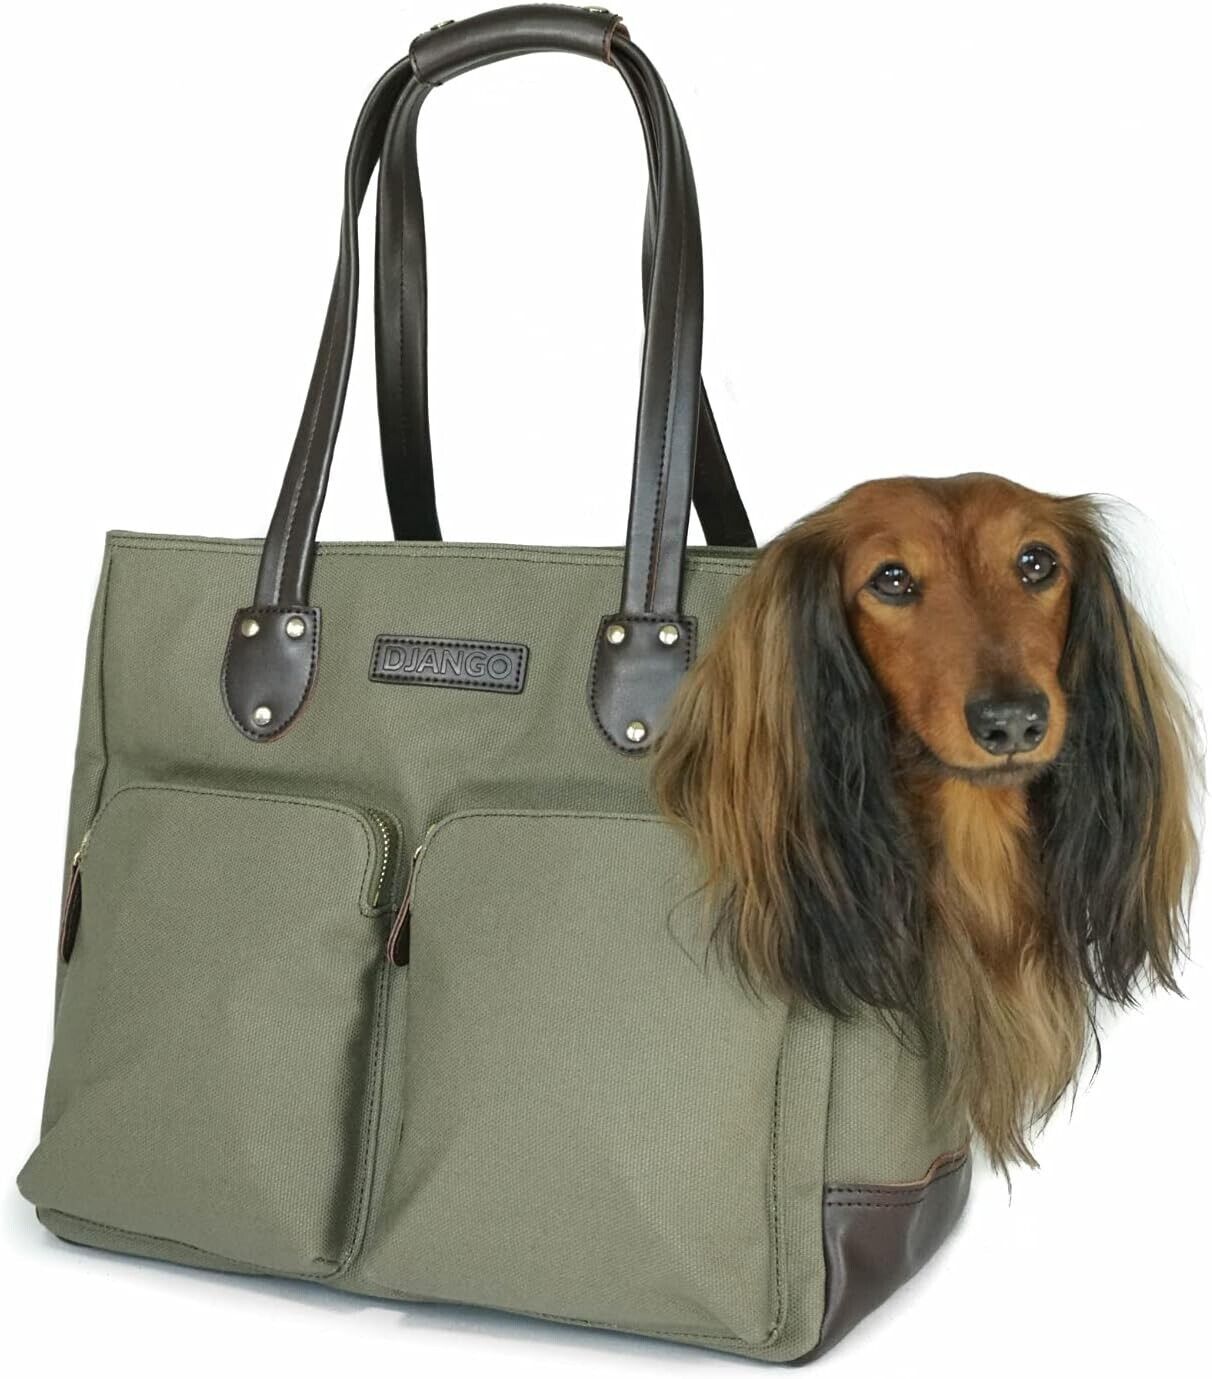 DJANGO Dog Carrier Bag - Waxed Canvas and Leather Soft-Sided Pet Travel Tote